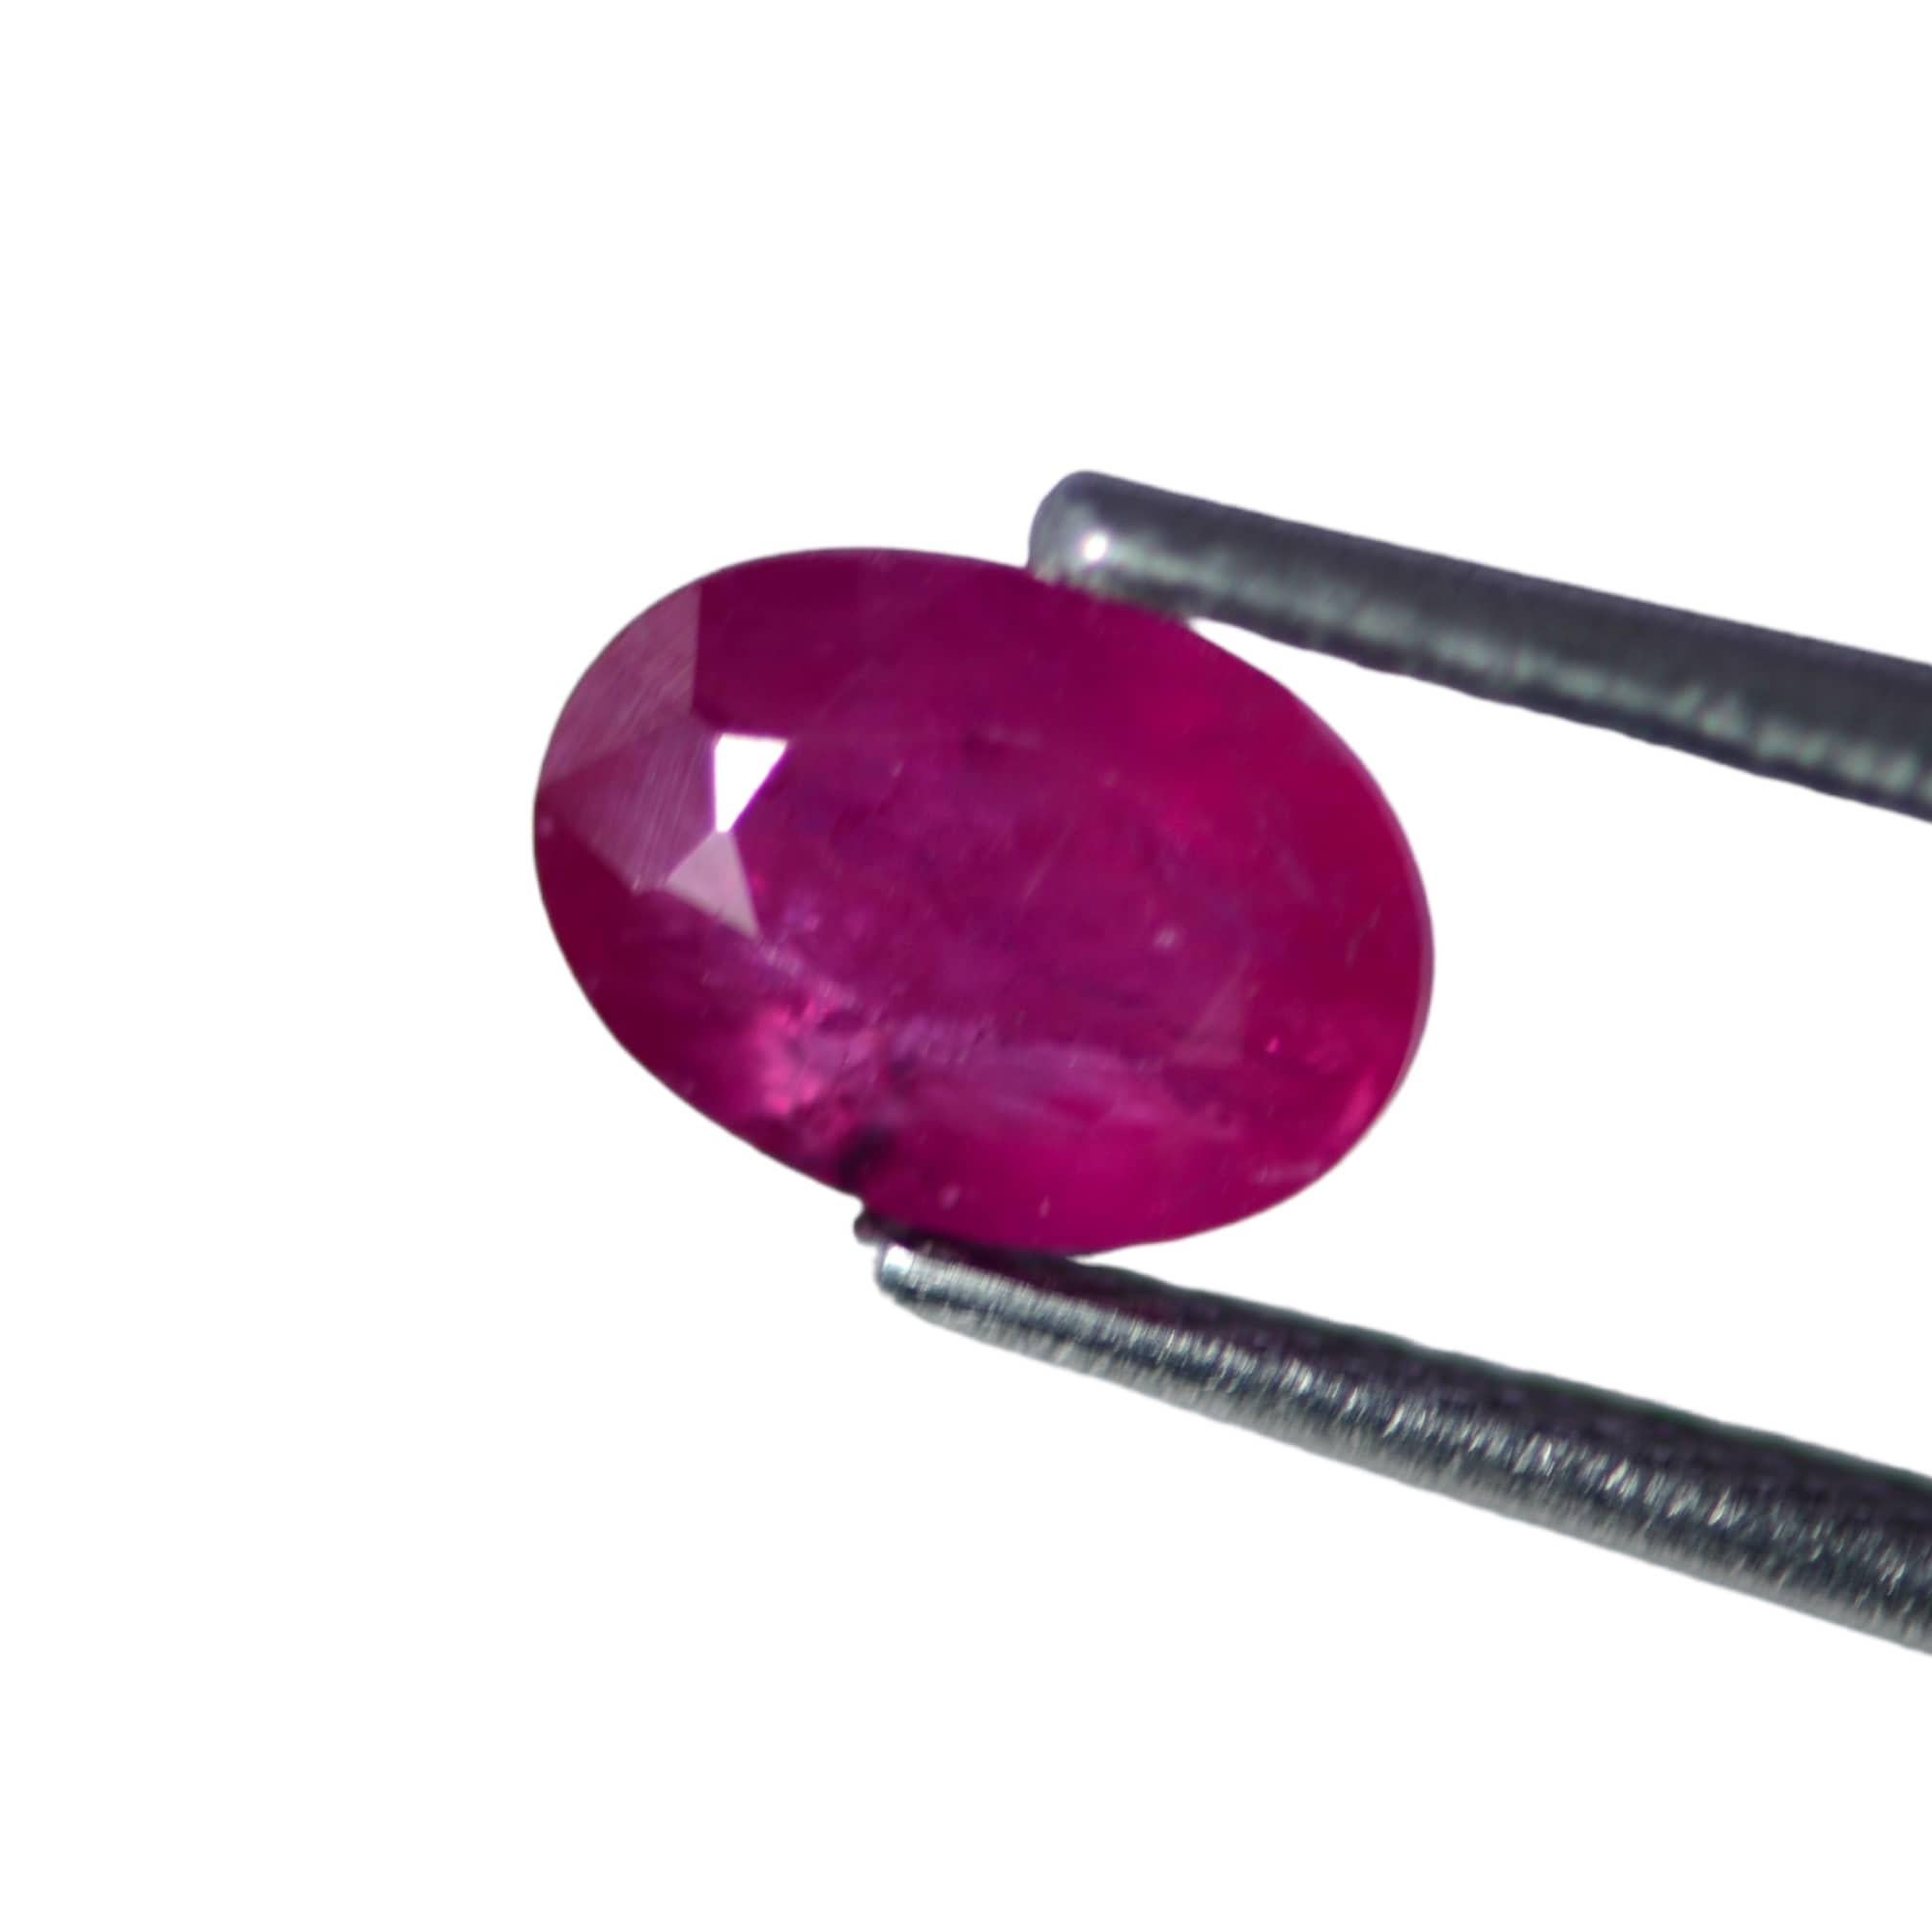 Species : Natural Corundum
Variety : Natural Ruby
Shape and Cut : Oval Mixed Cut
Weight : 1.13 Carat
Measurements : 7.06 x 5.15 x 3.44 mm
Color : Pinkish Red
Transparency : Semi-Transparent
Certificate number : 310834262
This gemstone is certified